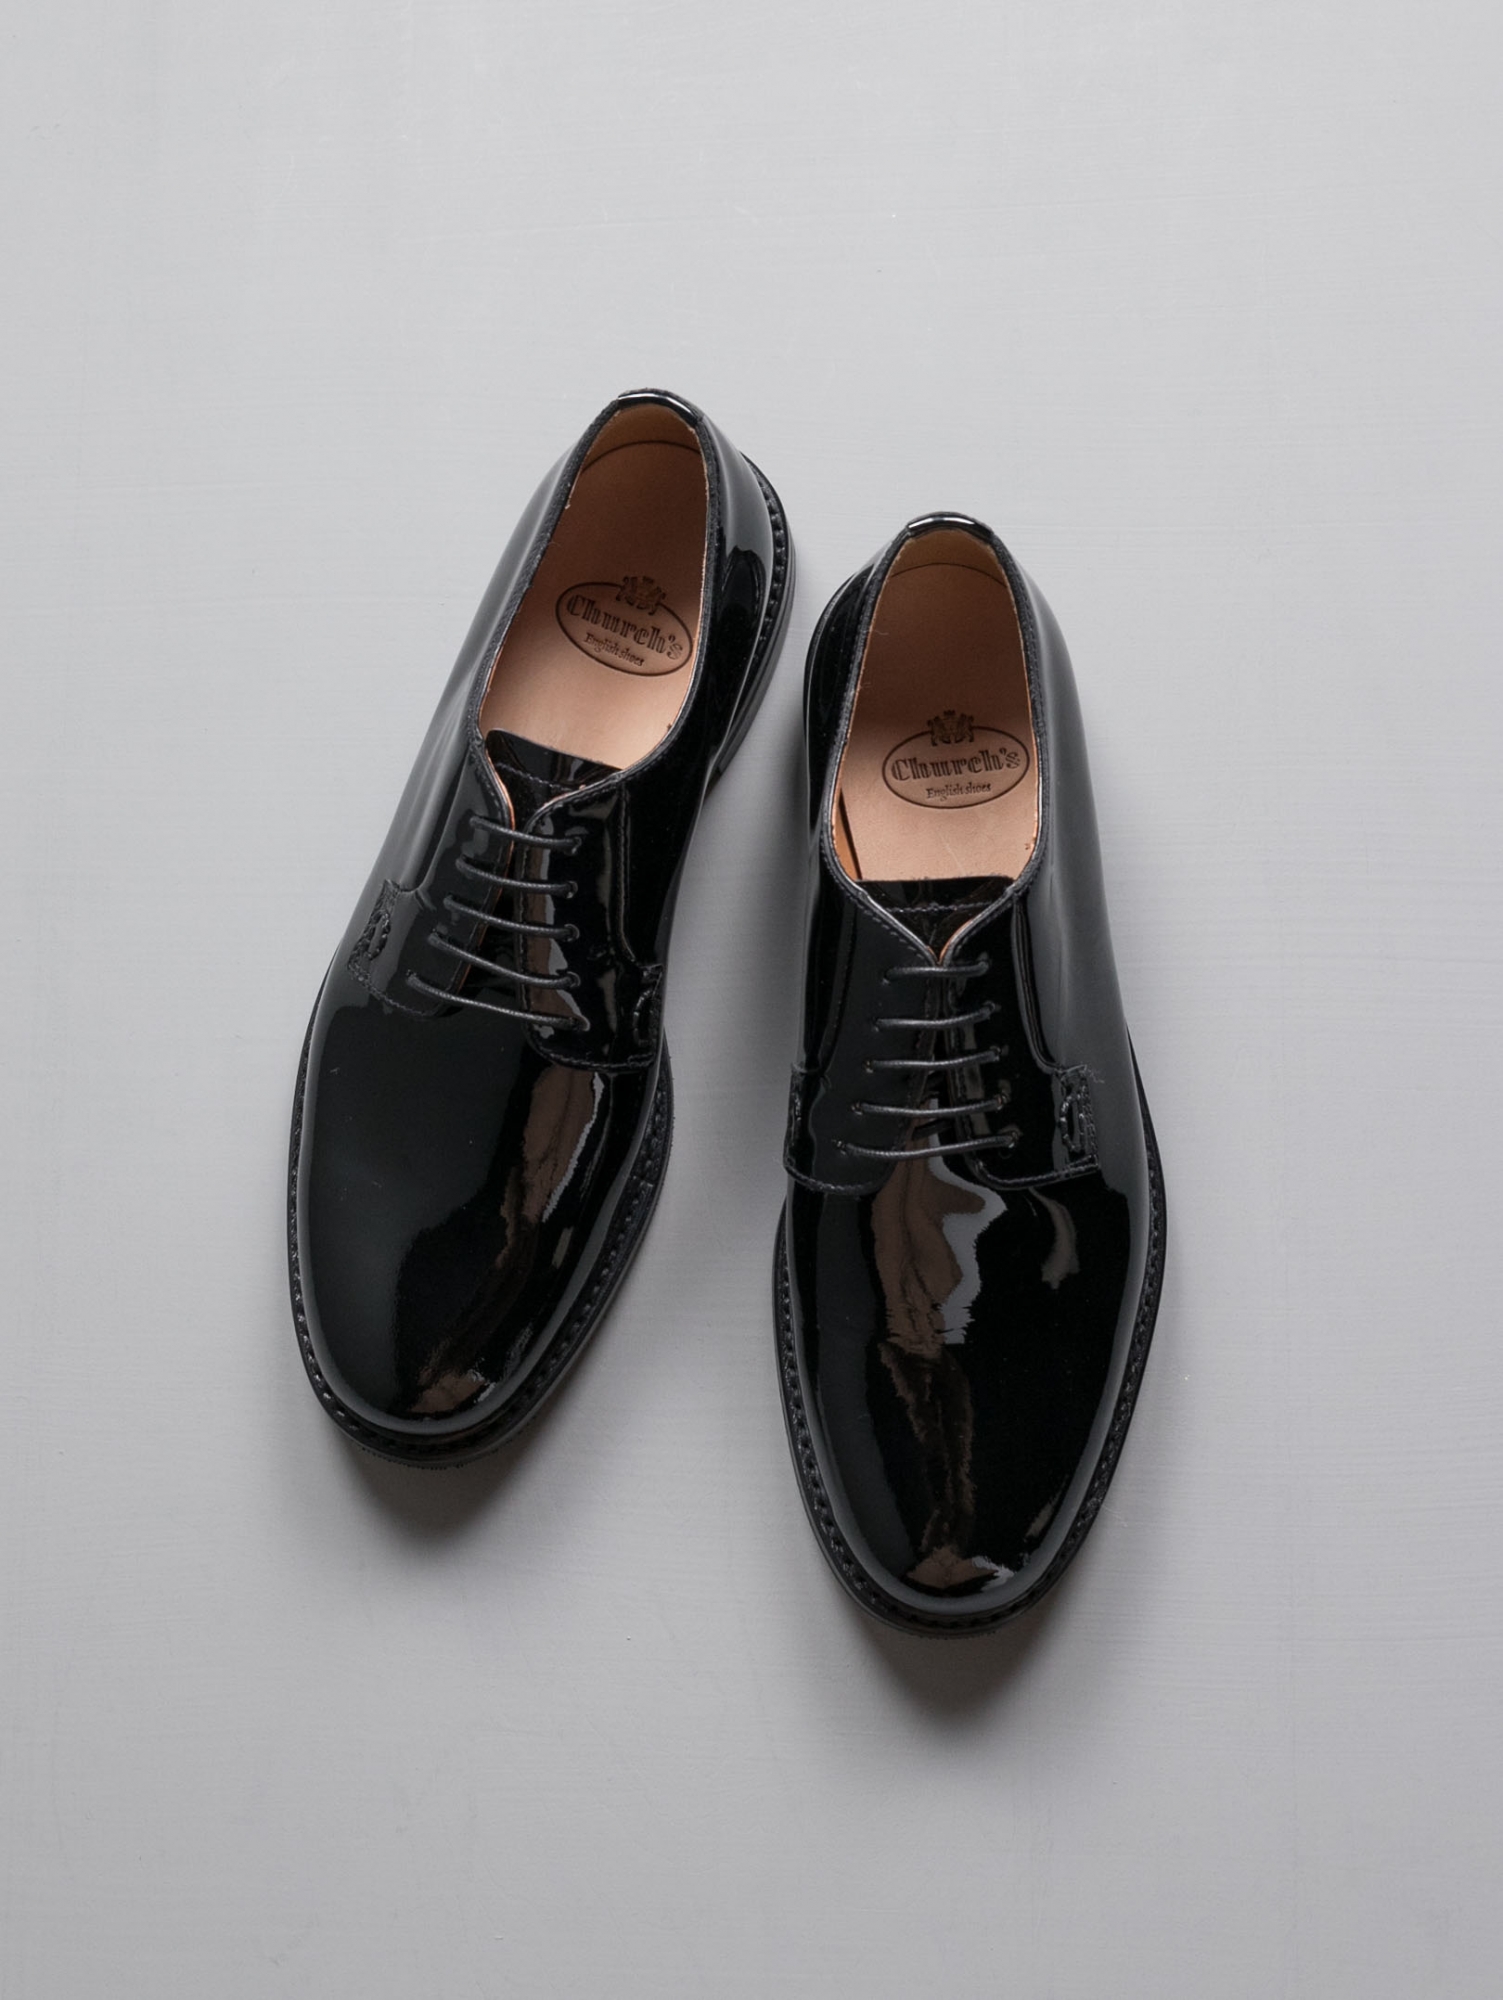 SHANNON 2WR Black Patent | Dresswell online store